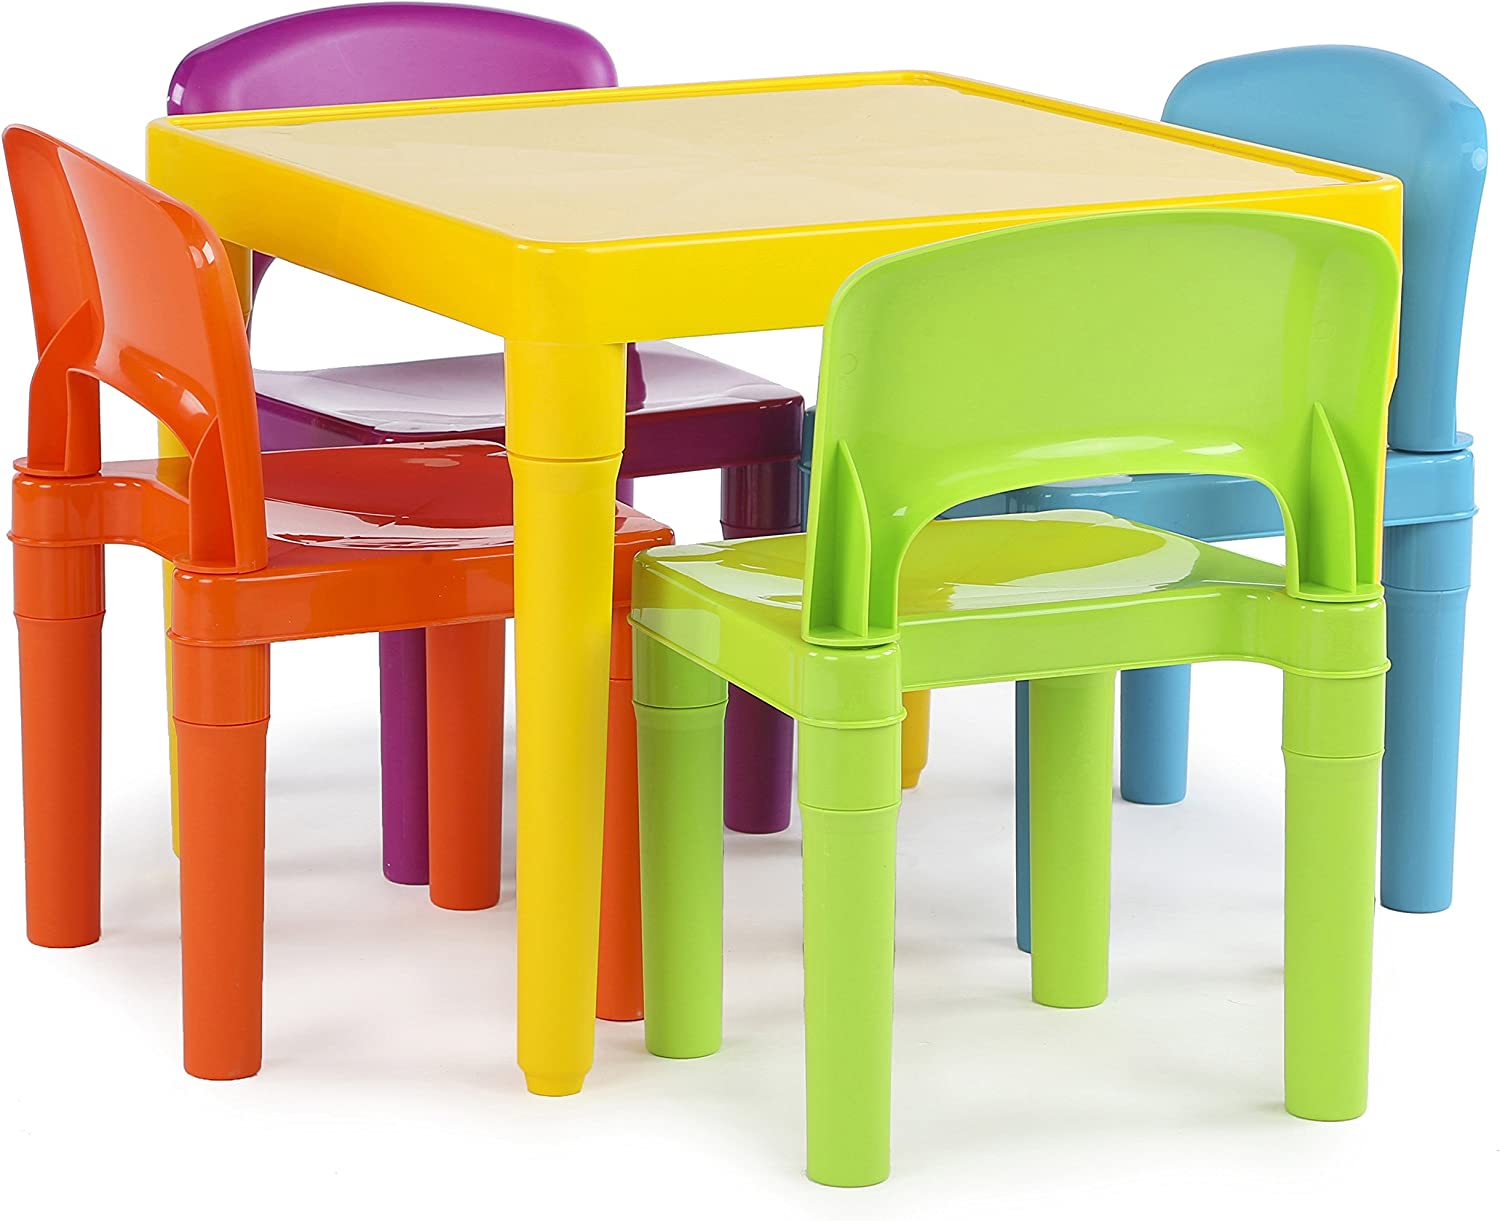 Humble Crew Lightweight Plastic Toddler Table & Chairs Set